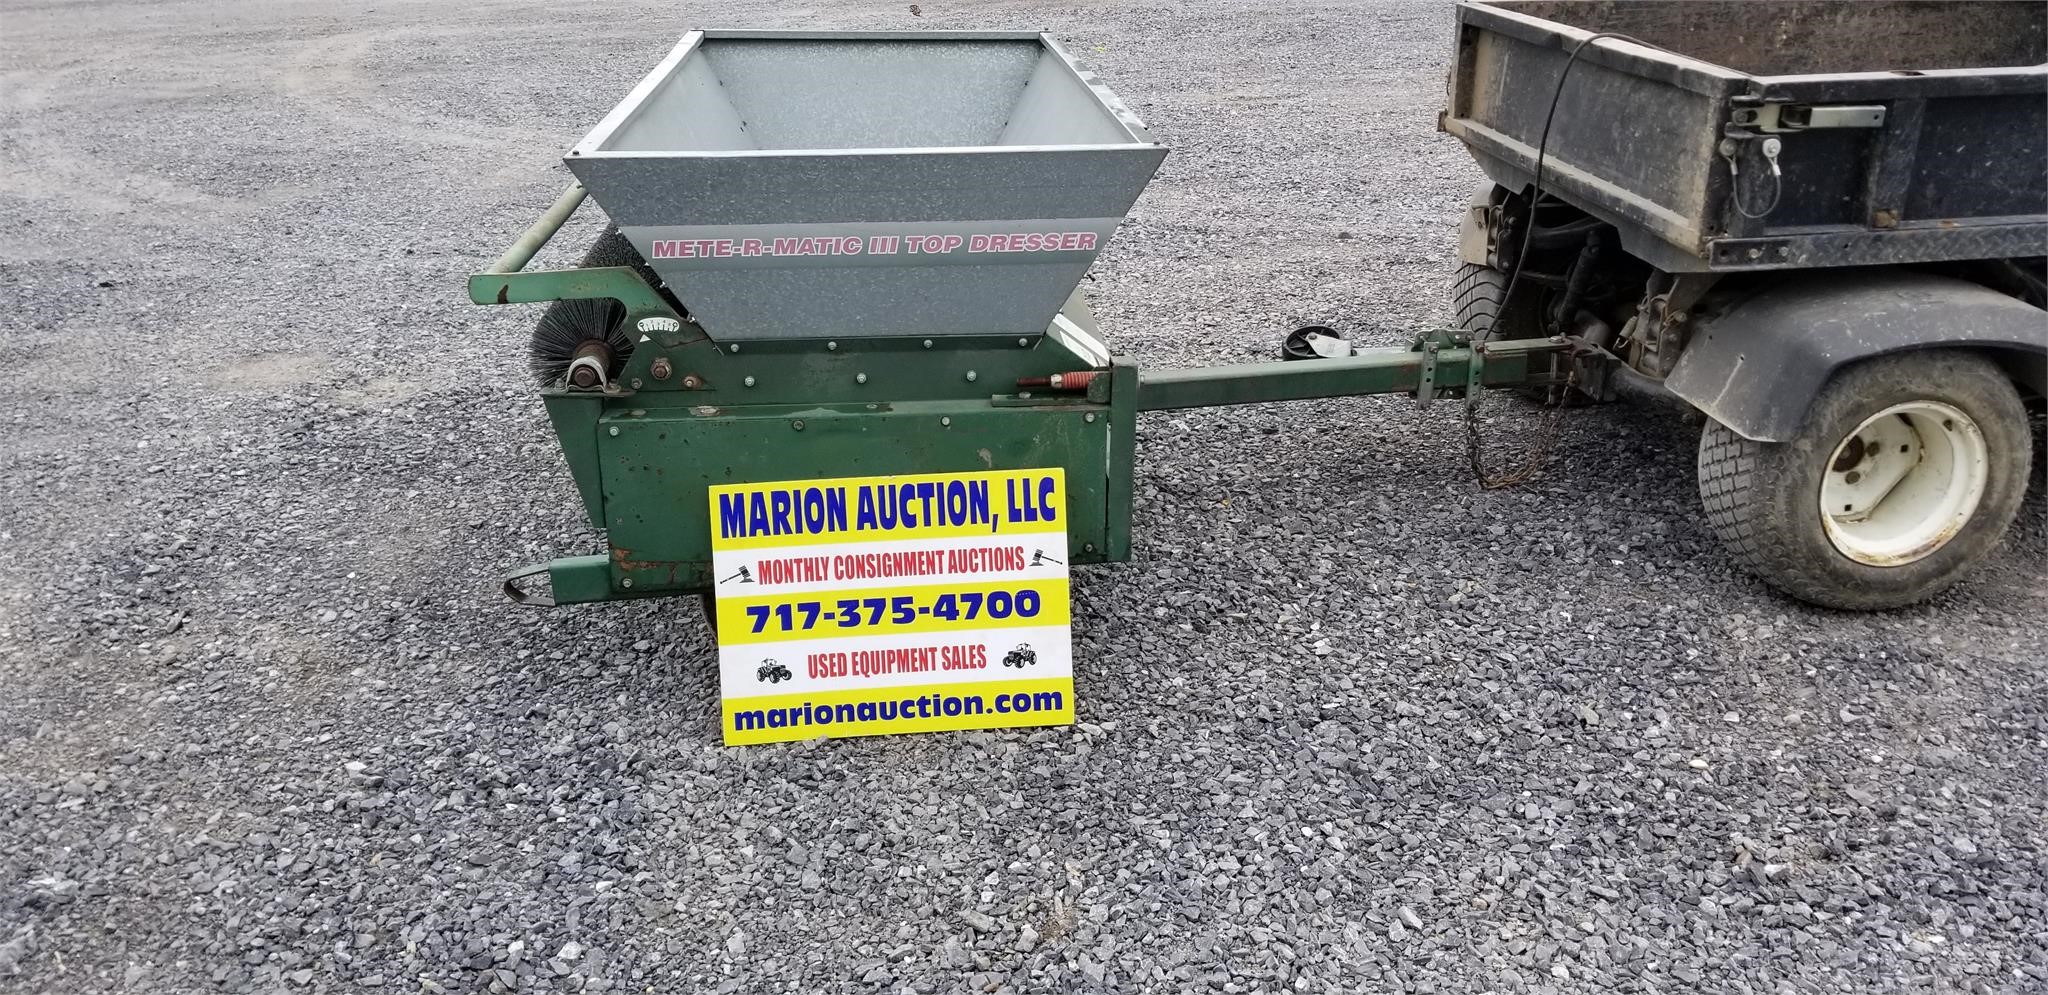 Turfco Mete R Matic Iii Auction Results In Chambersburg